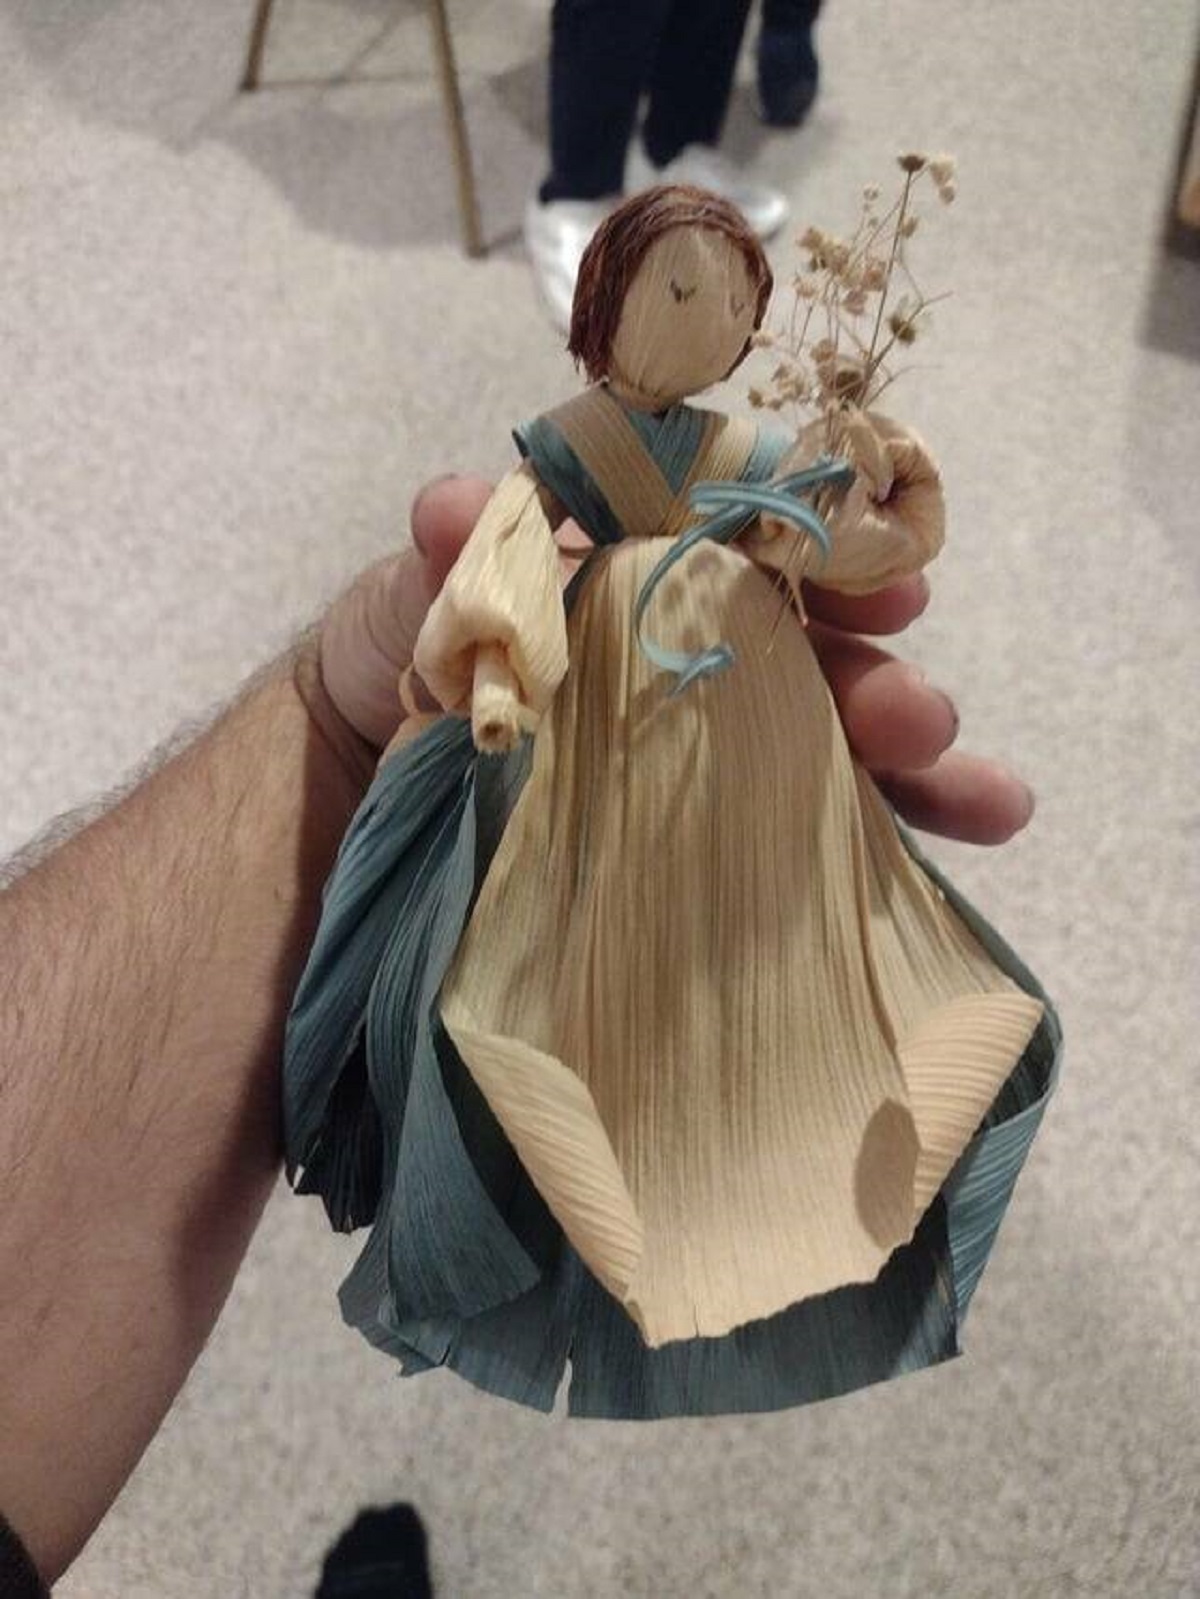 "A doll my grandmother made from corn husks and corn silk when she was young."